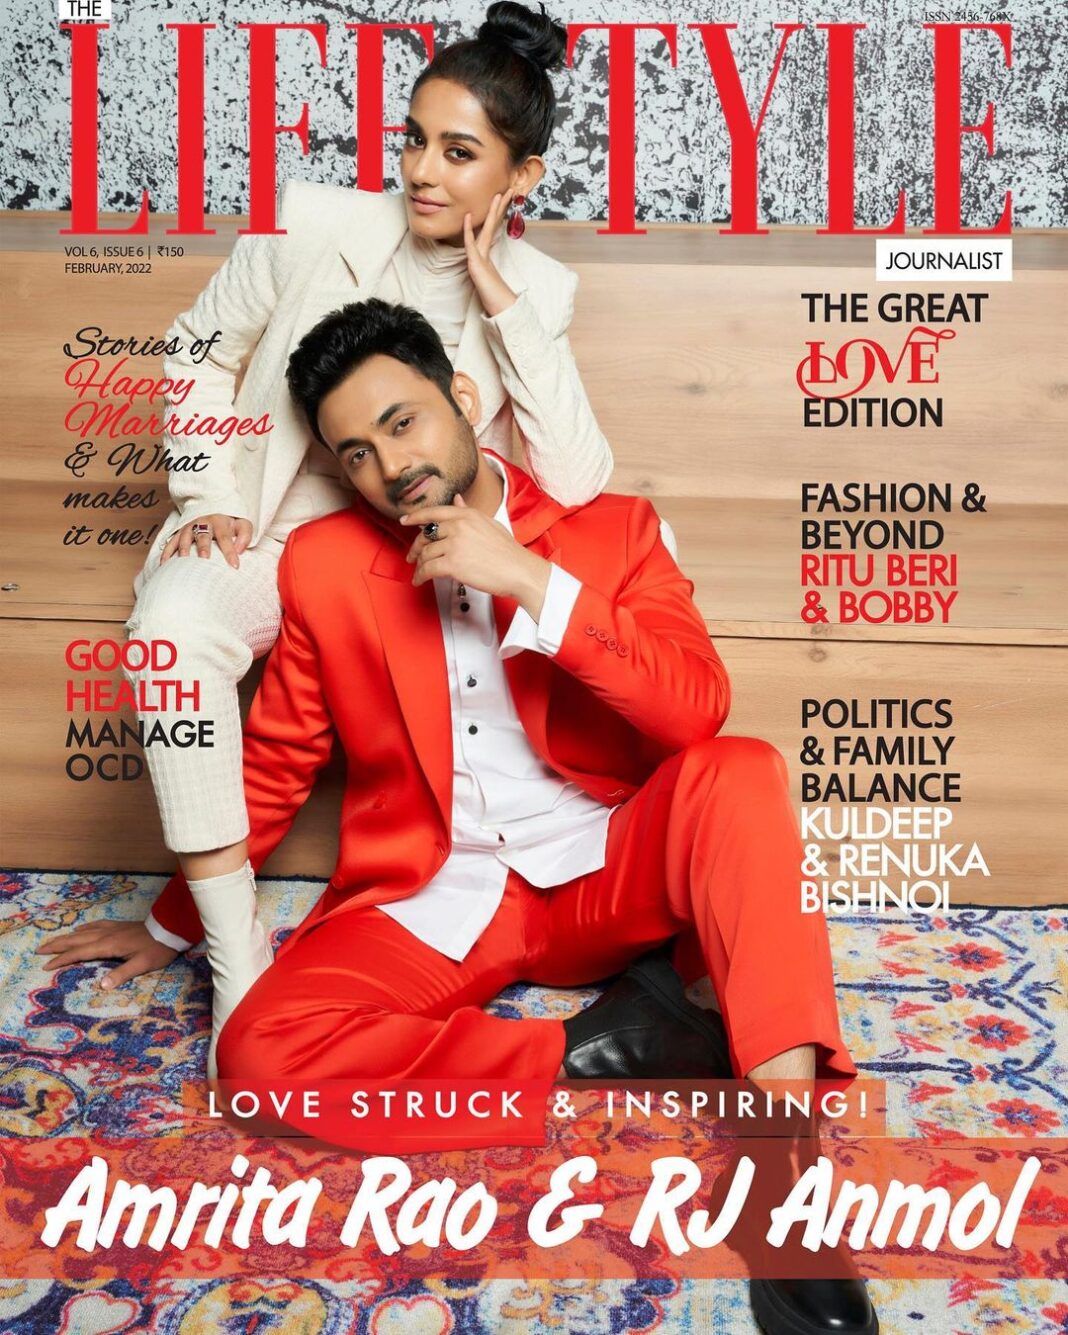 Amrita Rao Instagram - Our FIRST COVER Together #coupleofthings ❤️ The Month of Romance Starts with a BANG ⚡️ 1st Cover on 1st Feb 🤗 . Magazine: @tlj_magazine Editor: @nehamiglani11 Creative Director: @ankurvadhera Produced by: @maximus_collabs_ Stylist: @stylingbyvictor & @sohail_mughal__ Photographer: @kvinayak11 Make-up: @loveleen_makeupandhair Hair assistant: @_misheeta Outfit: @zara Accessories: @aquamarine_jewellery Location: @maximusstudiomumbai Artist's PR Agency: @hypenq_pr Co-ordinated by: @nadiiaamalik #couplegoals #amritarao #rjanmol #love #couplegoals #magazinecover #valentines #february #romance